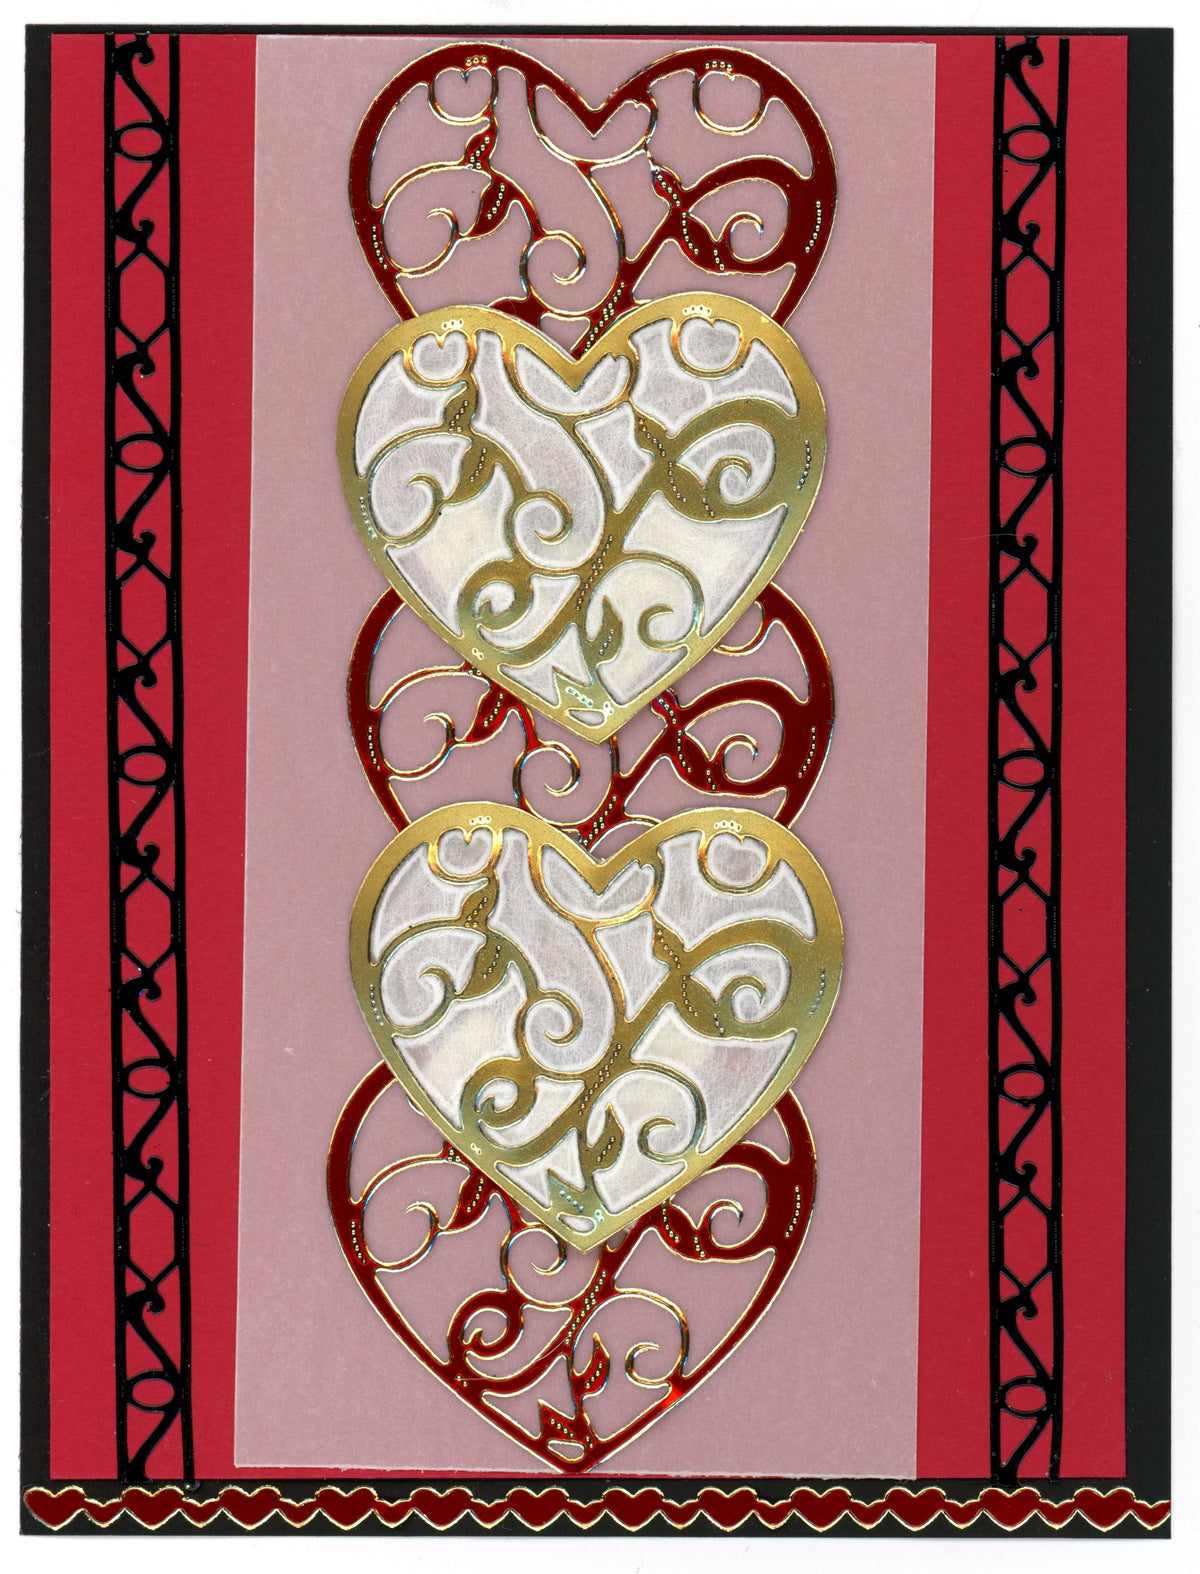 Heart Ornaments Outline Stickers  1900